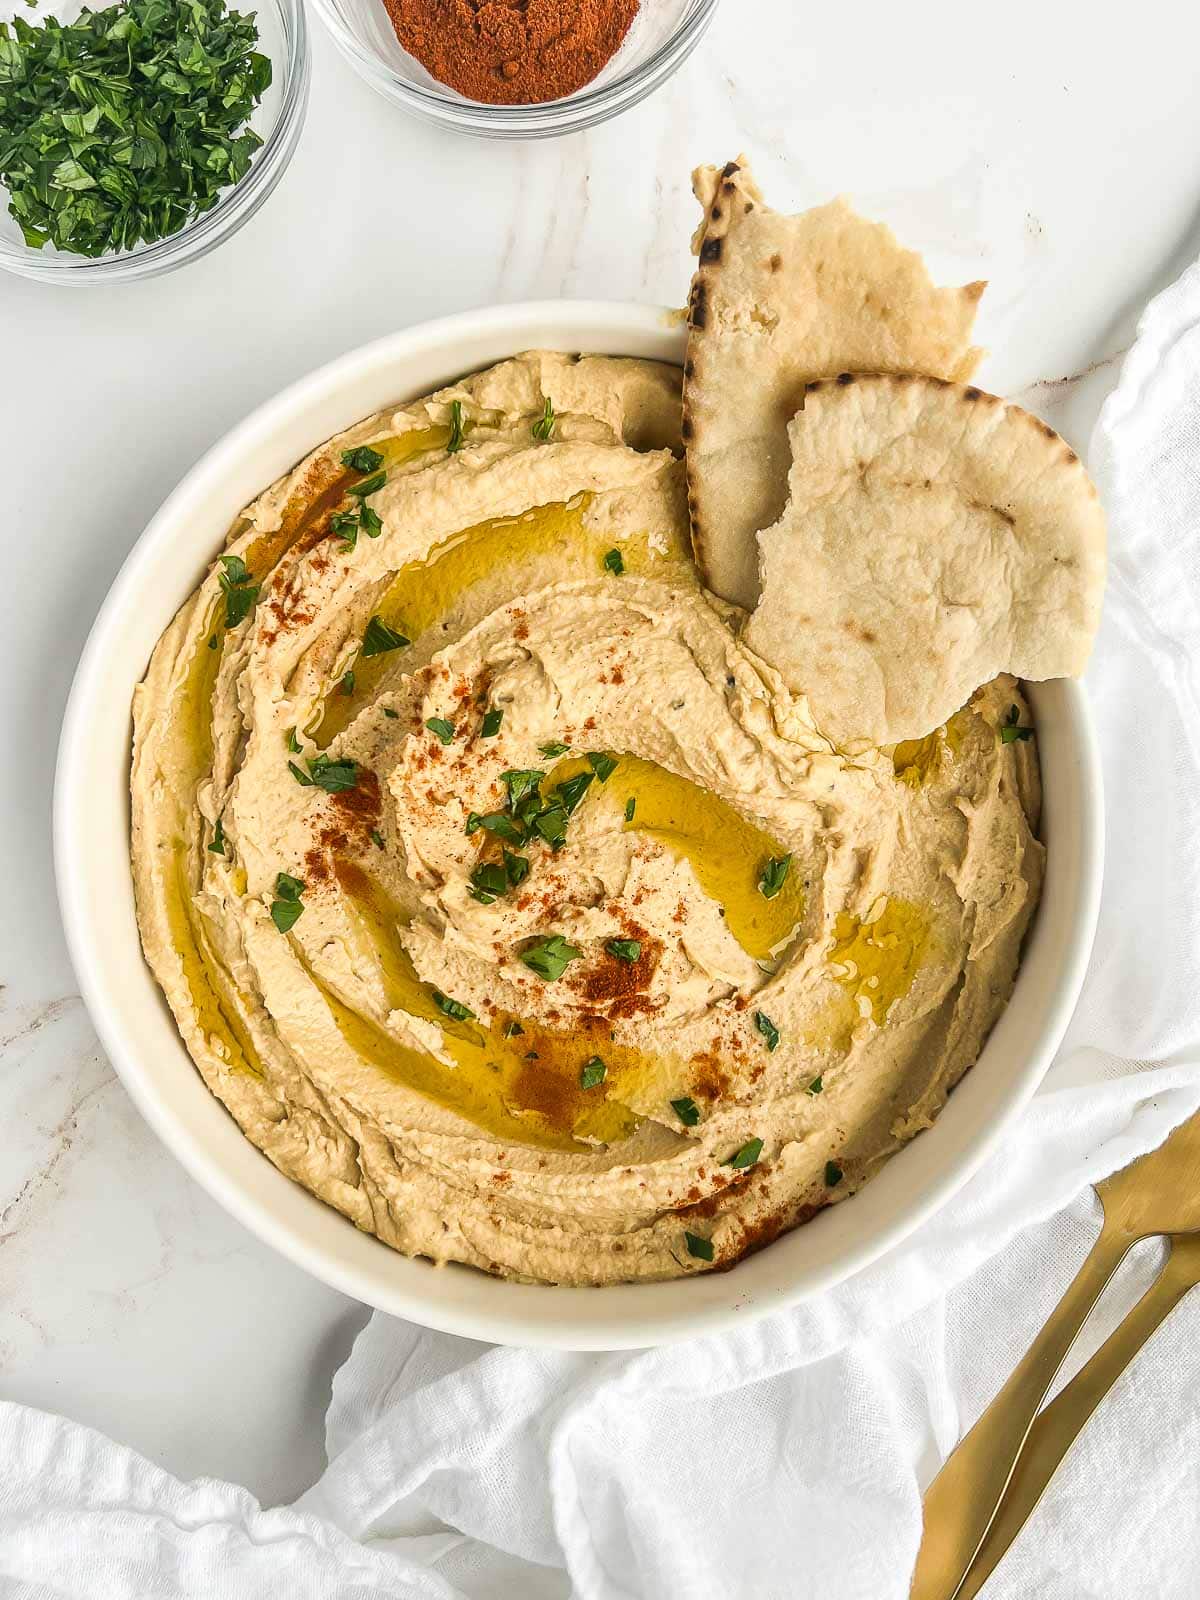 Bowl of hummus topped with paprika, parsley, and olive oil with a couple pieces of pita tucked in.